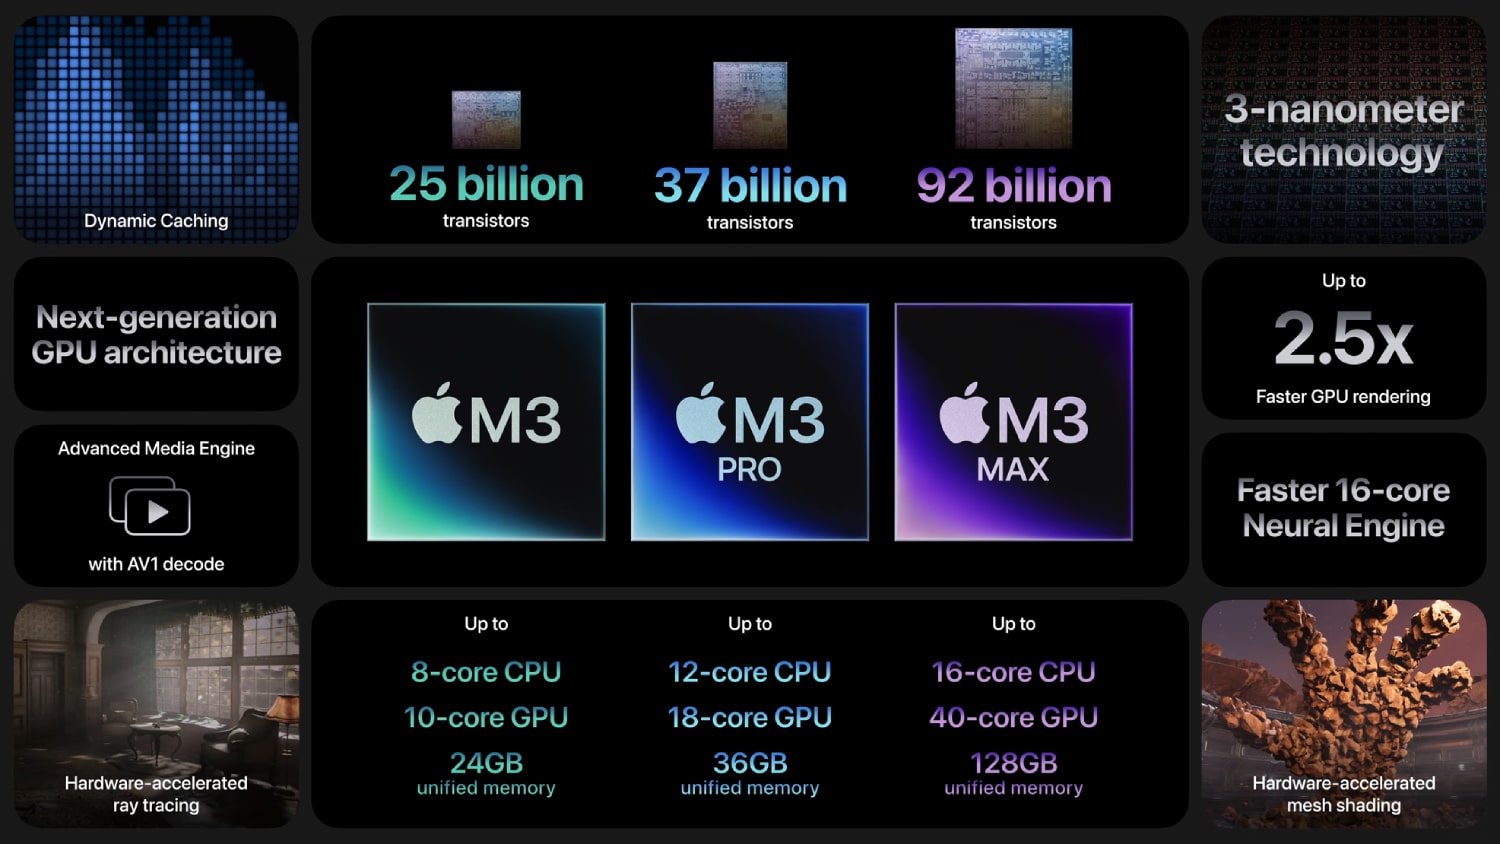 Statistics and features for Apple's M3 series of chips, including the M3, M3 Pro and M3 Max.